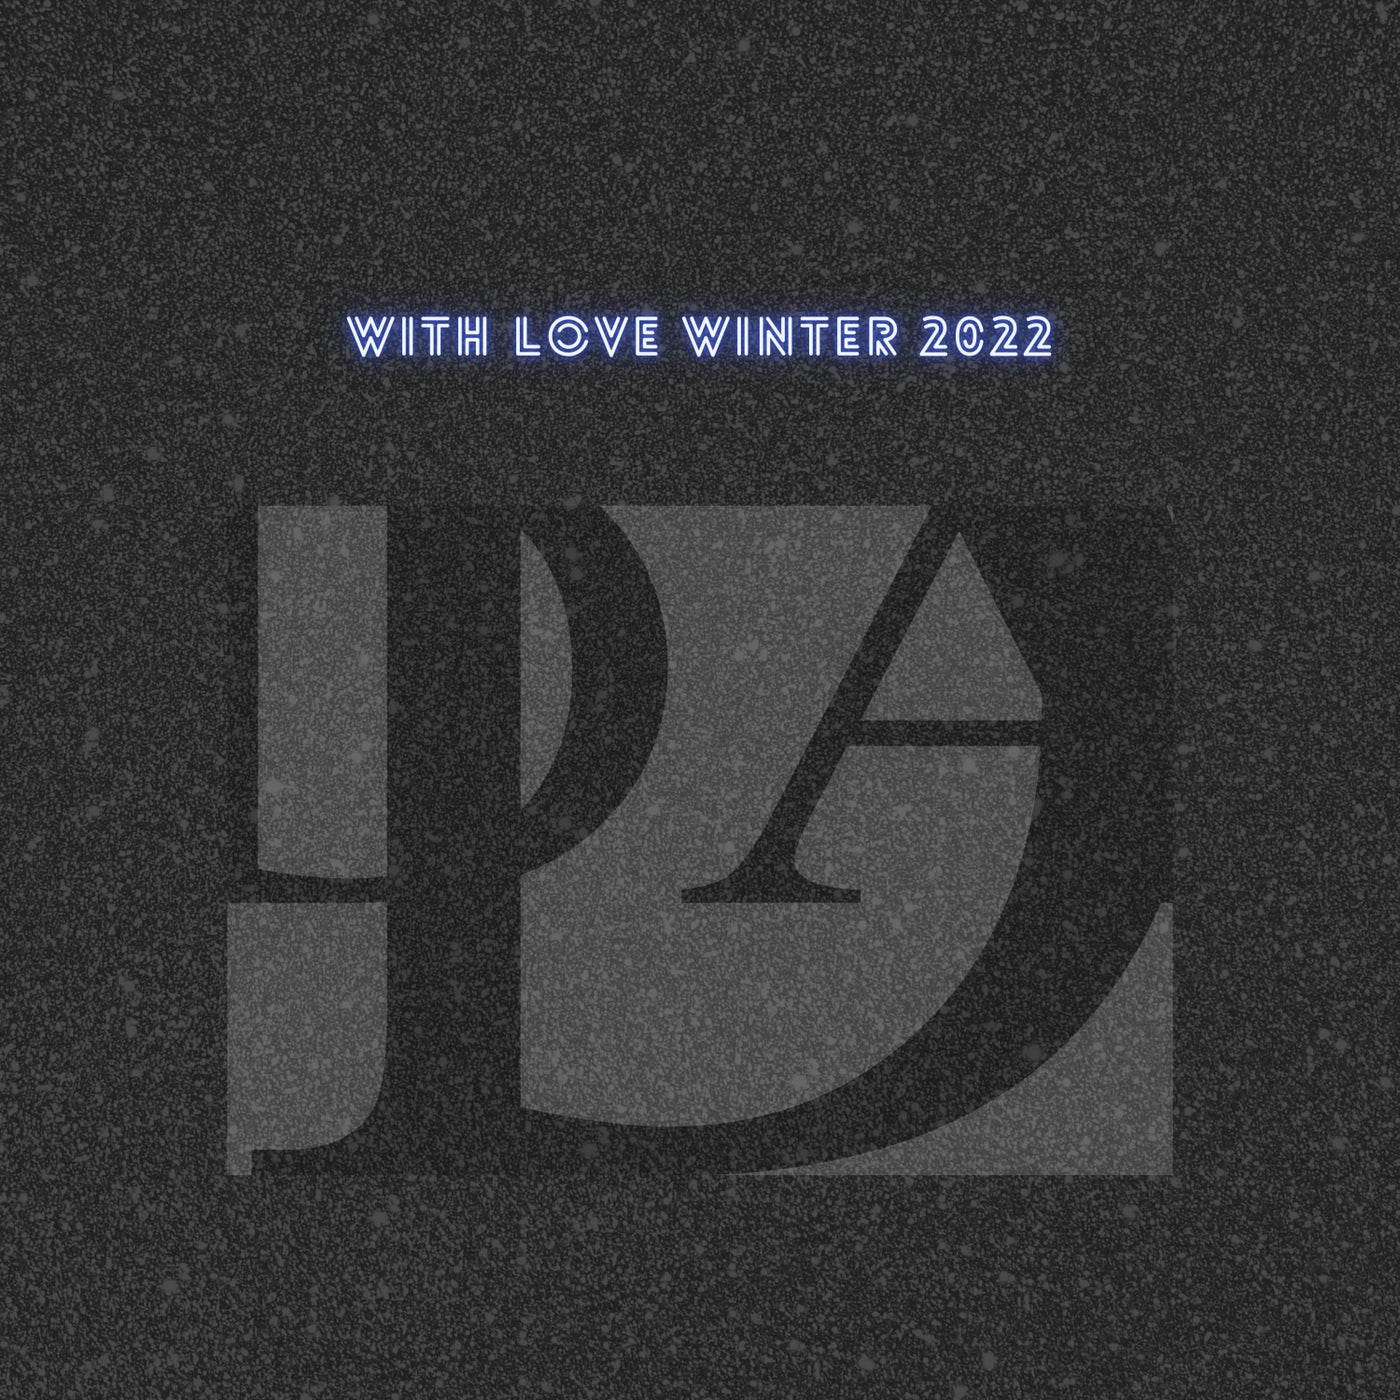 With Love Winter 2022